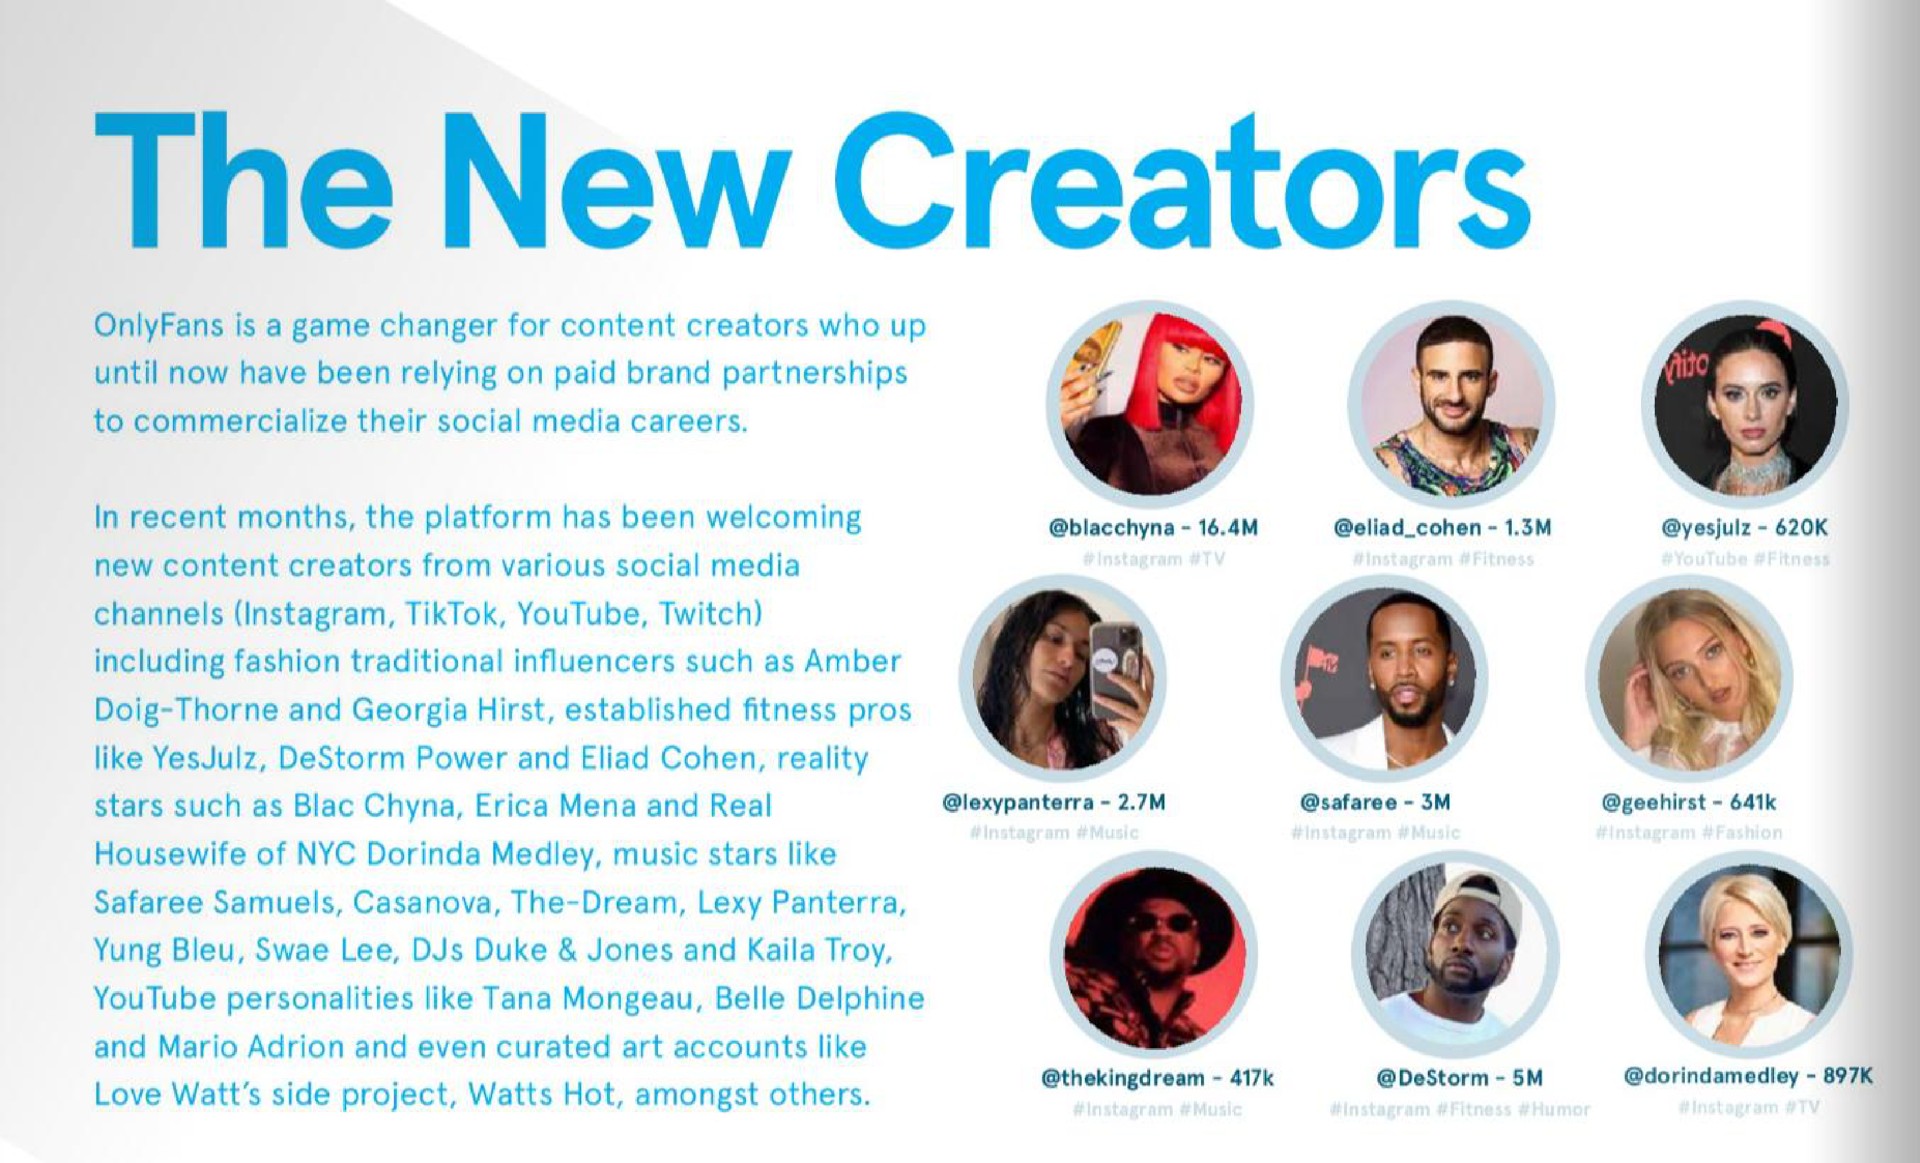 the new creators | OnlyFans